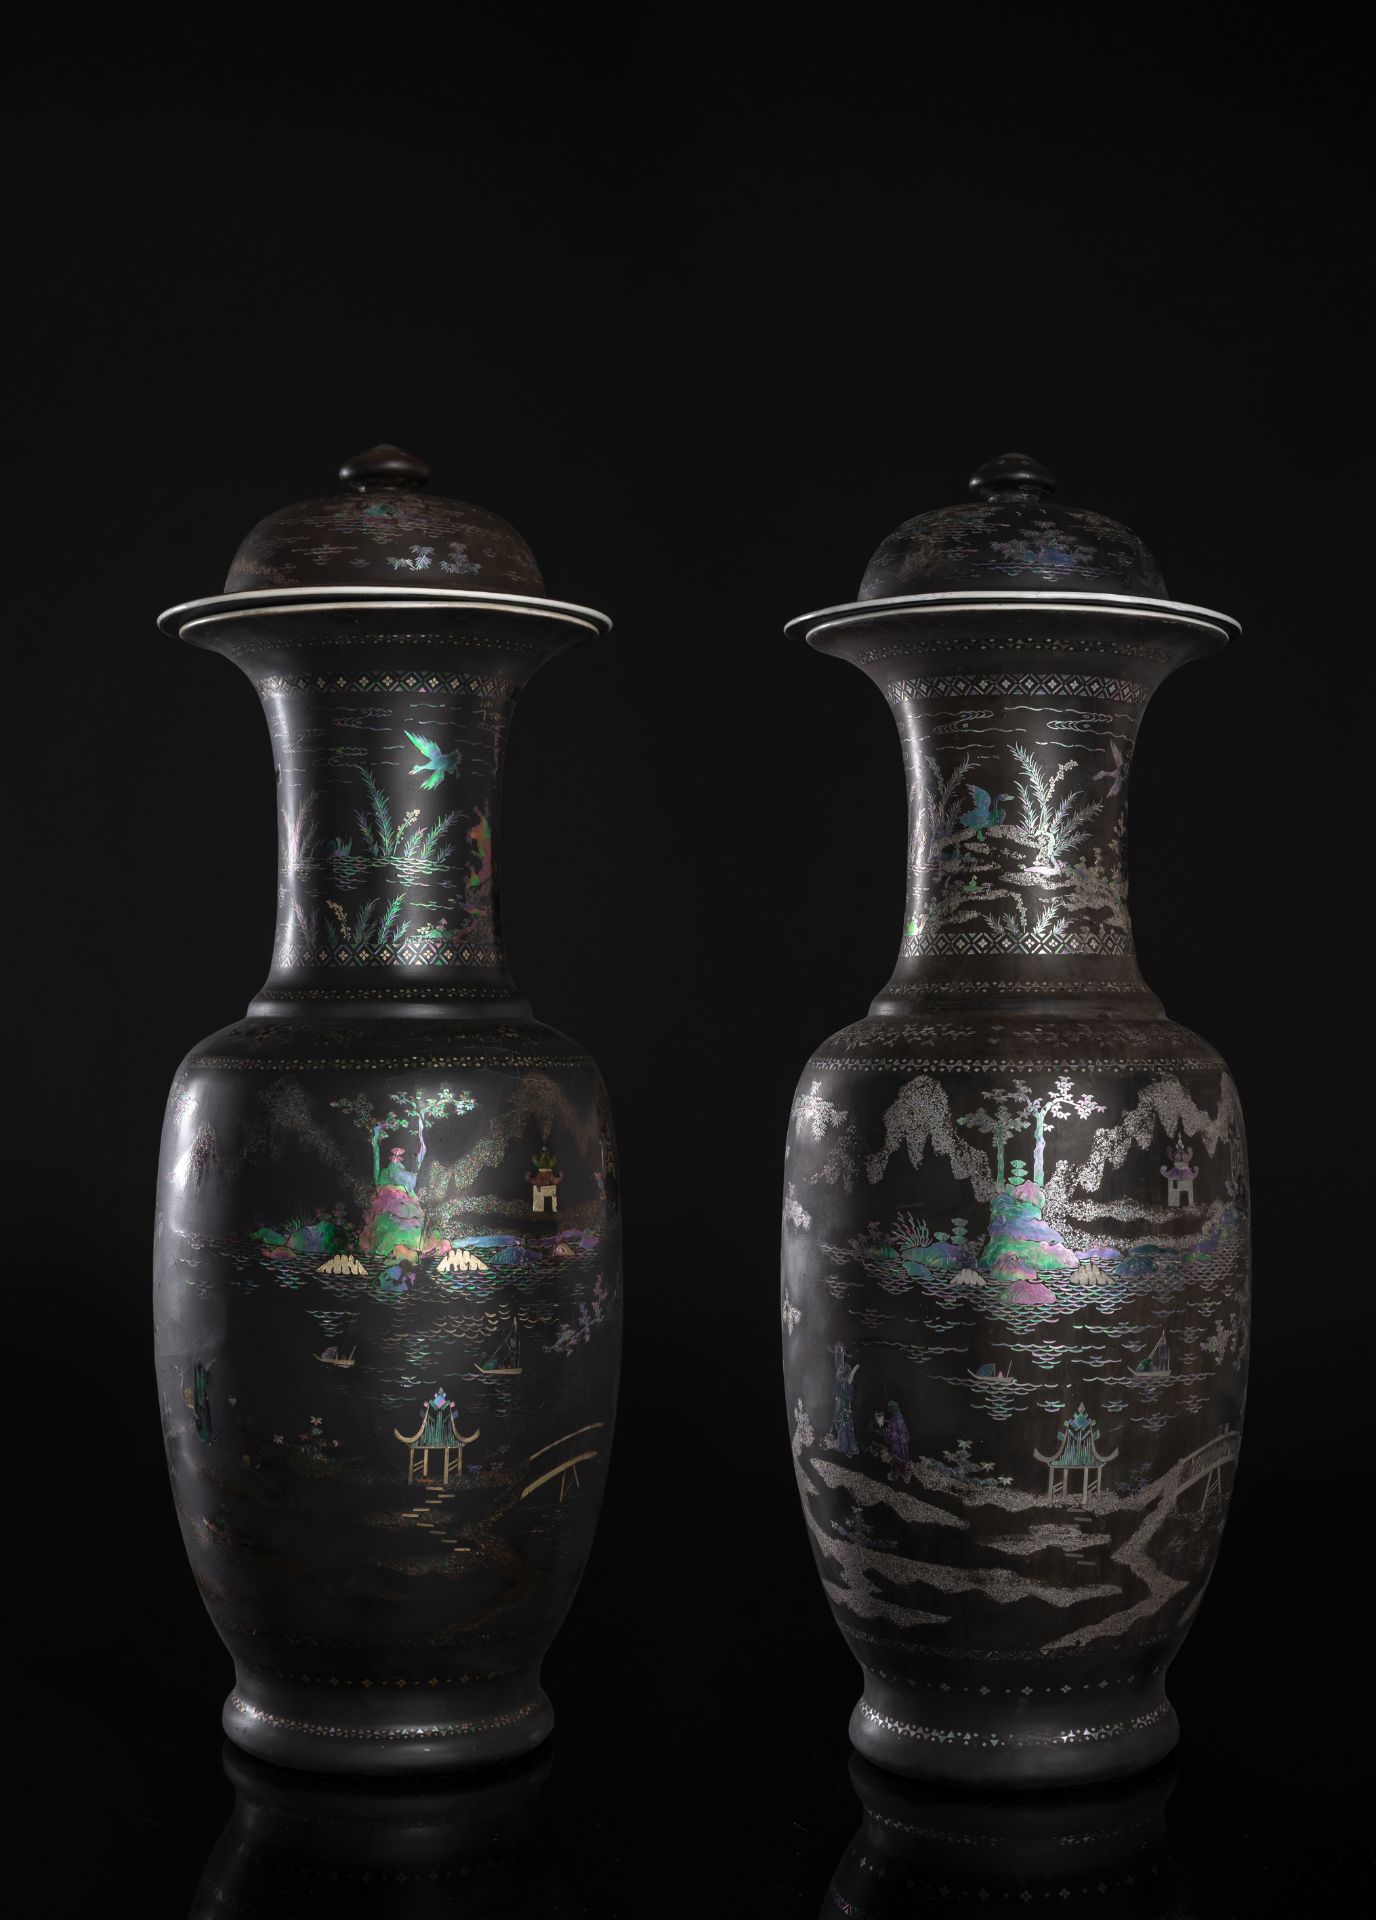 A VERY RARE AND LARGE PAIR OF LAC-BURGAUTÉ PORCELAIN VASES AND COVERS - Image 4 of 7